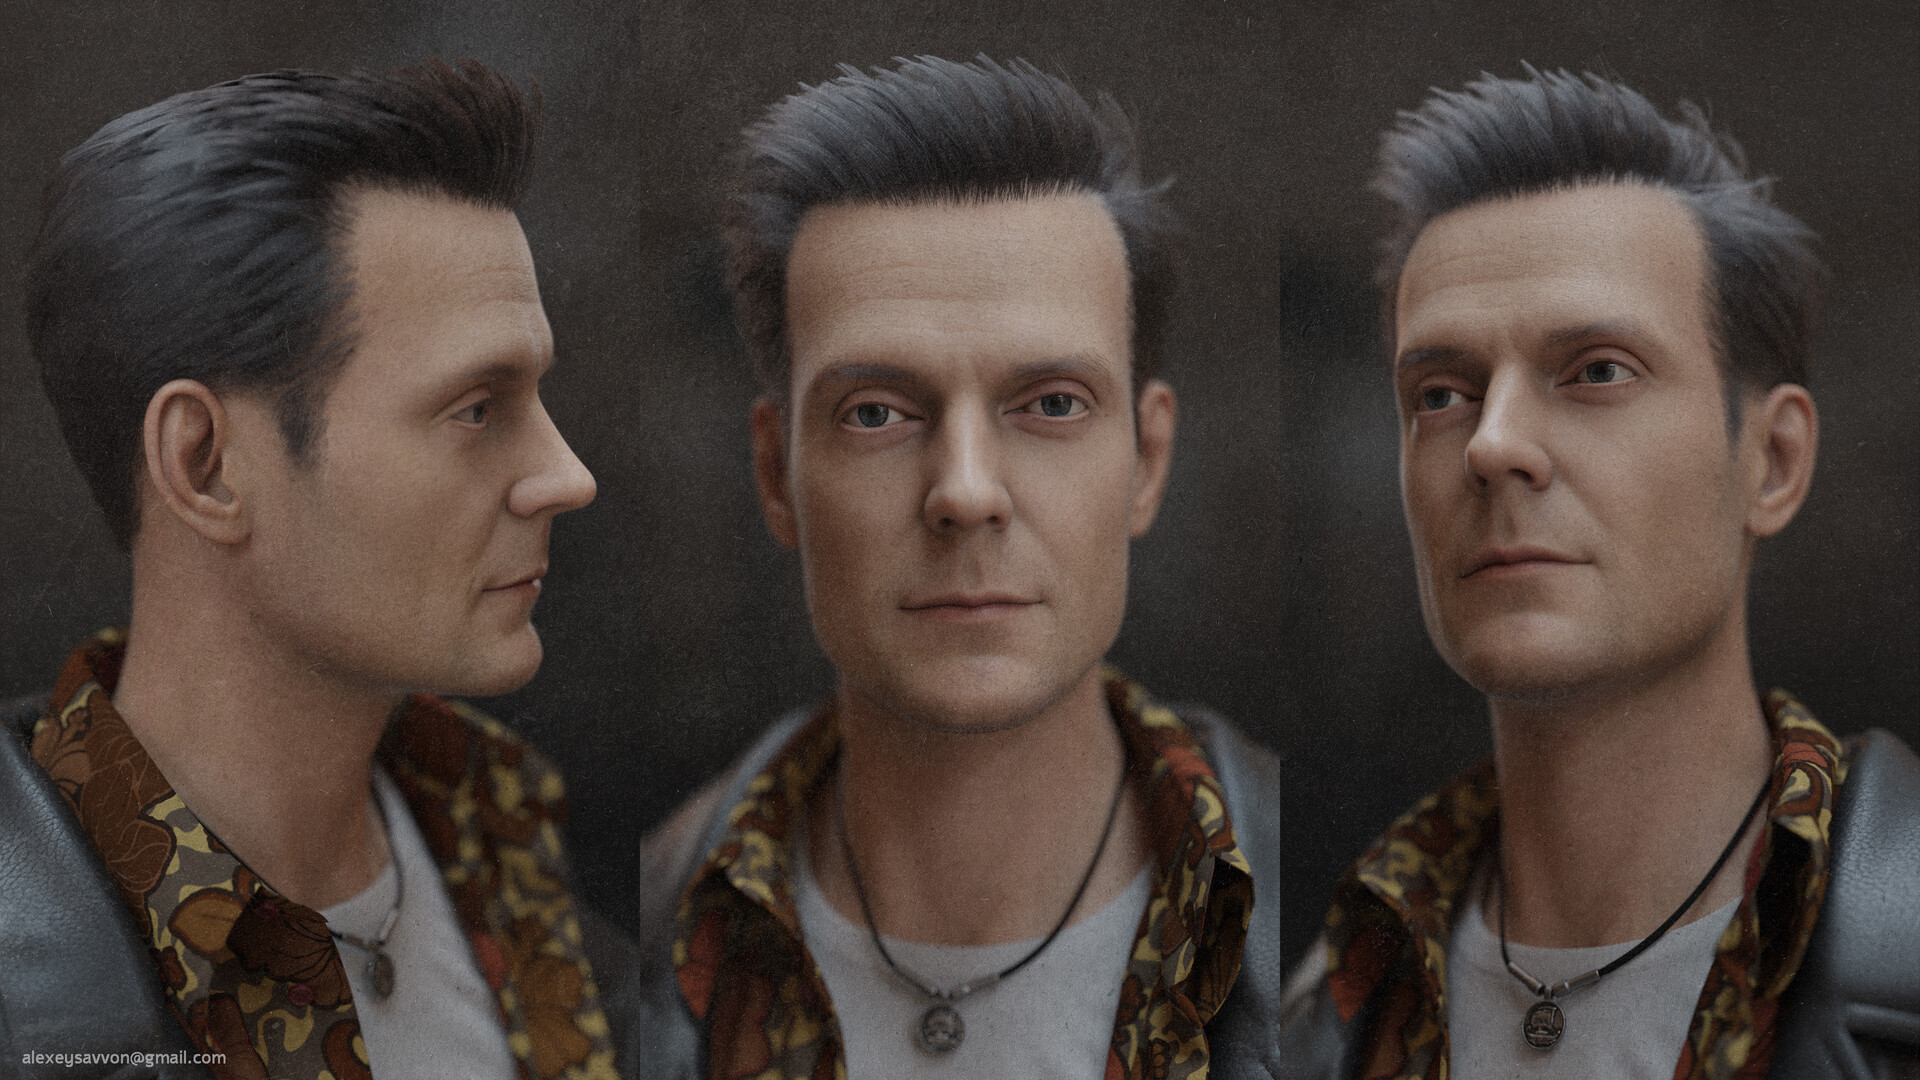 Max Payne 20: Making of the artwork by Anebarone. - PayneReactor